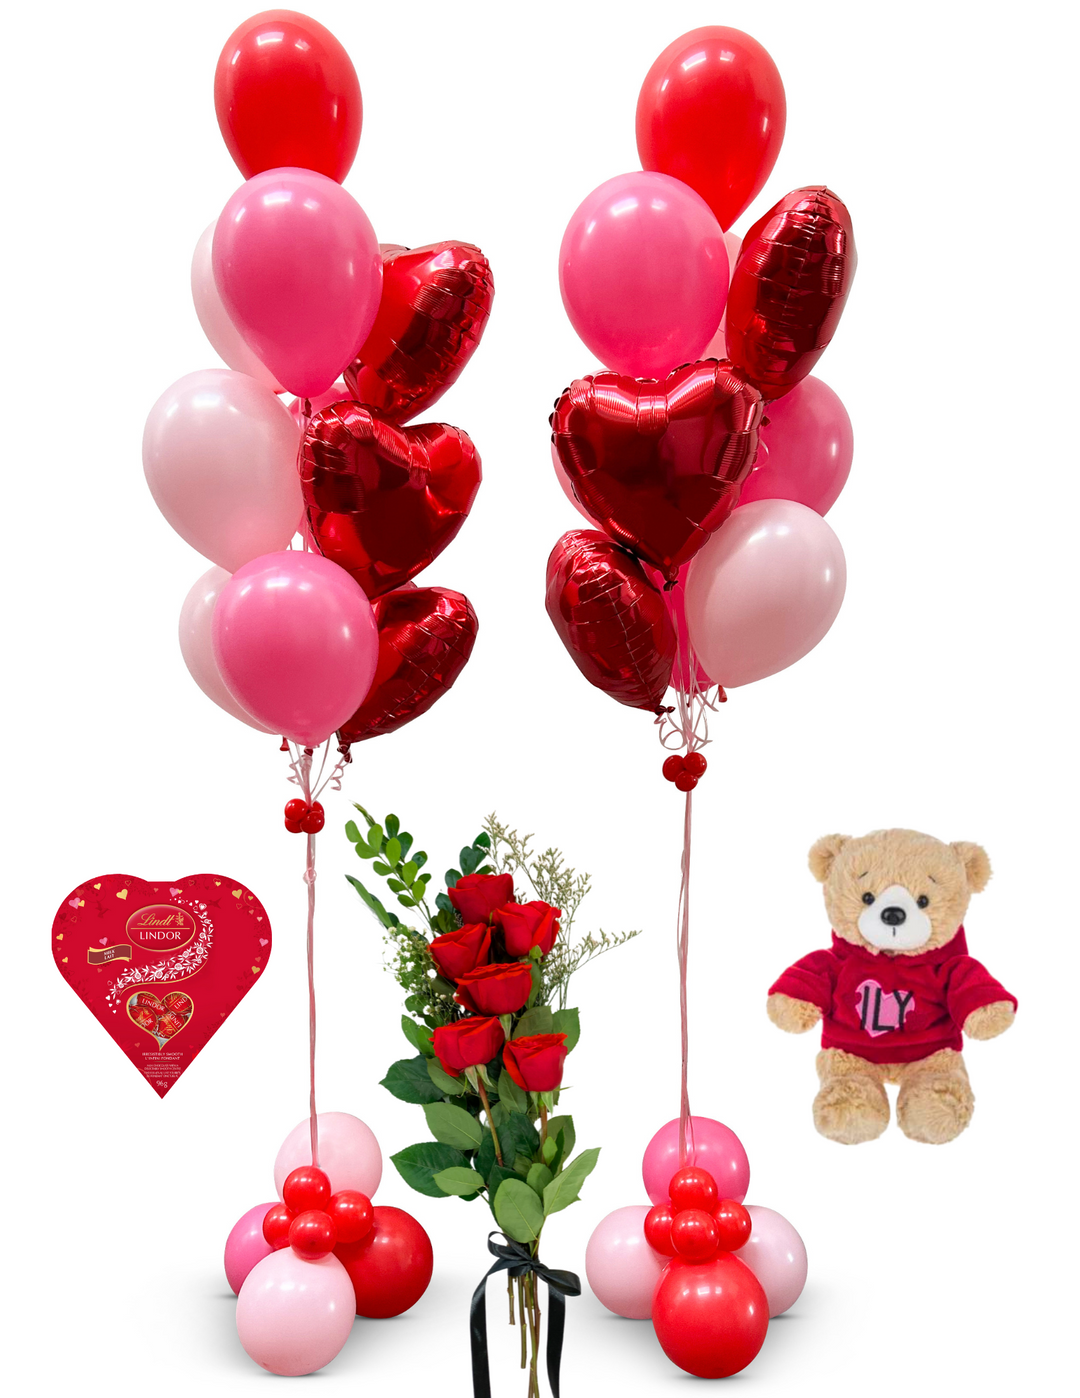 (INCLUDES 6 ROSES) VIP Valentine's Day Package - 2 Jumbo Valentine's Day Bouquets with a Teddy Bear and chocolates